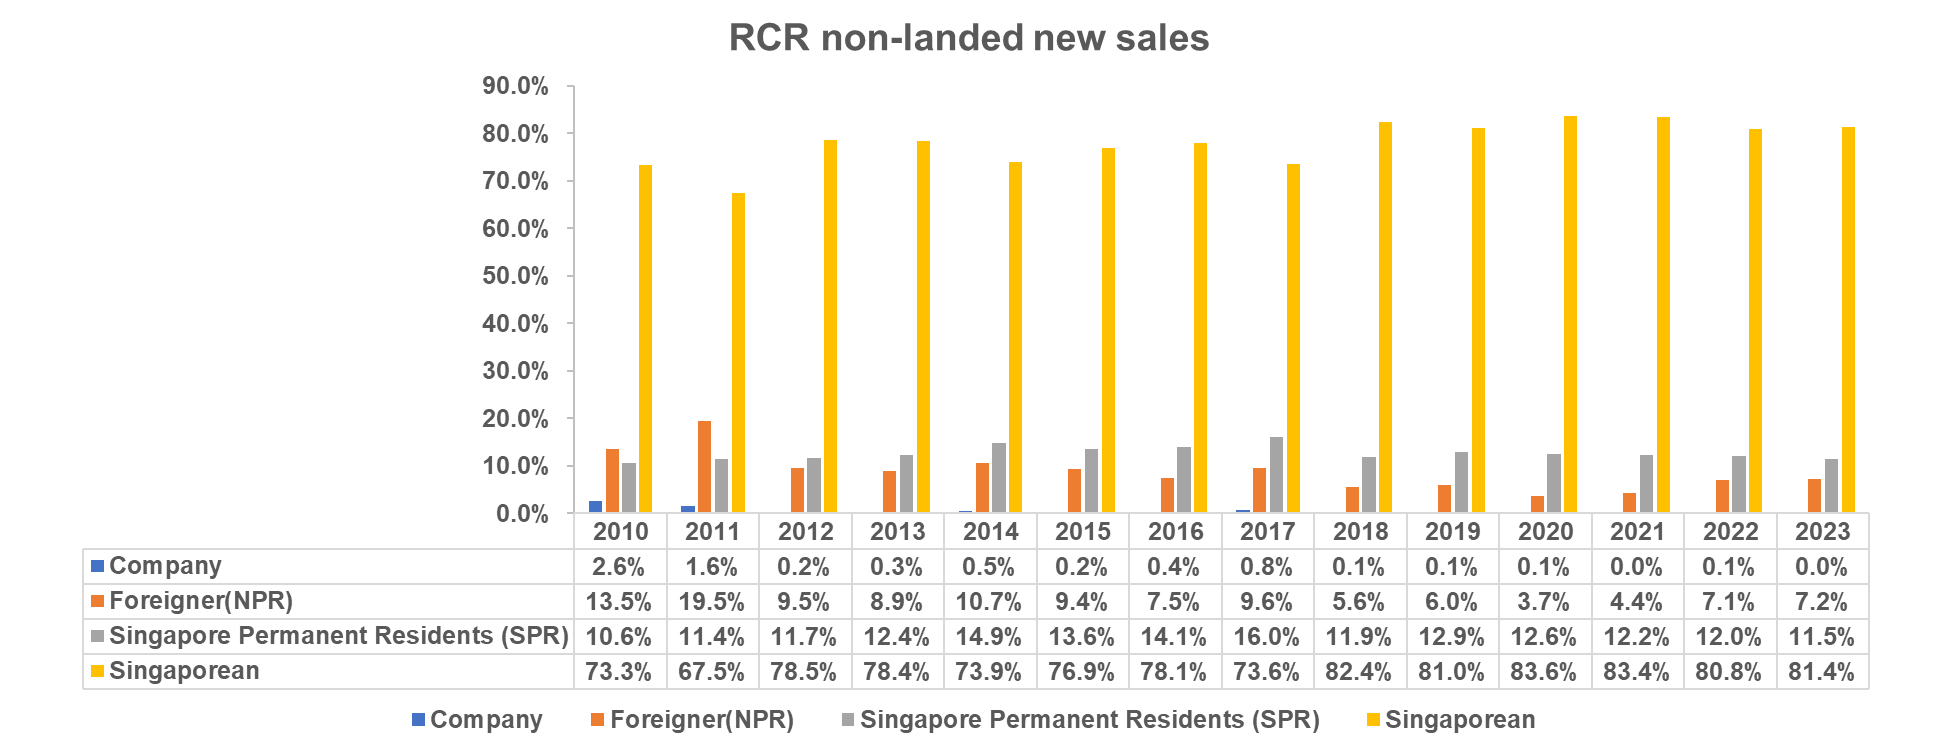 RCR non-landed new sales nationality breakdown (2010 to 2023)